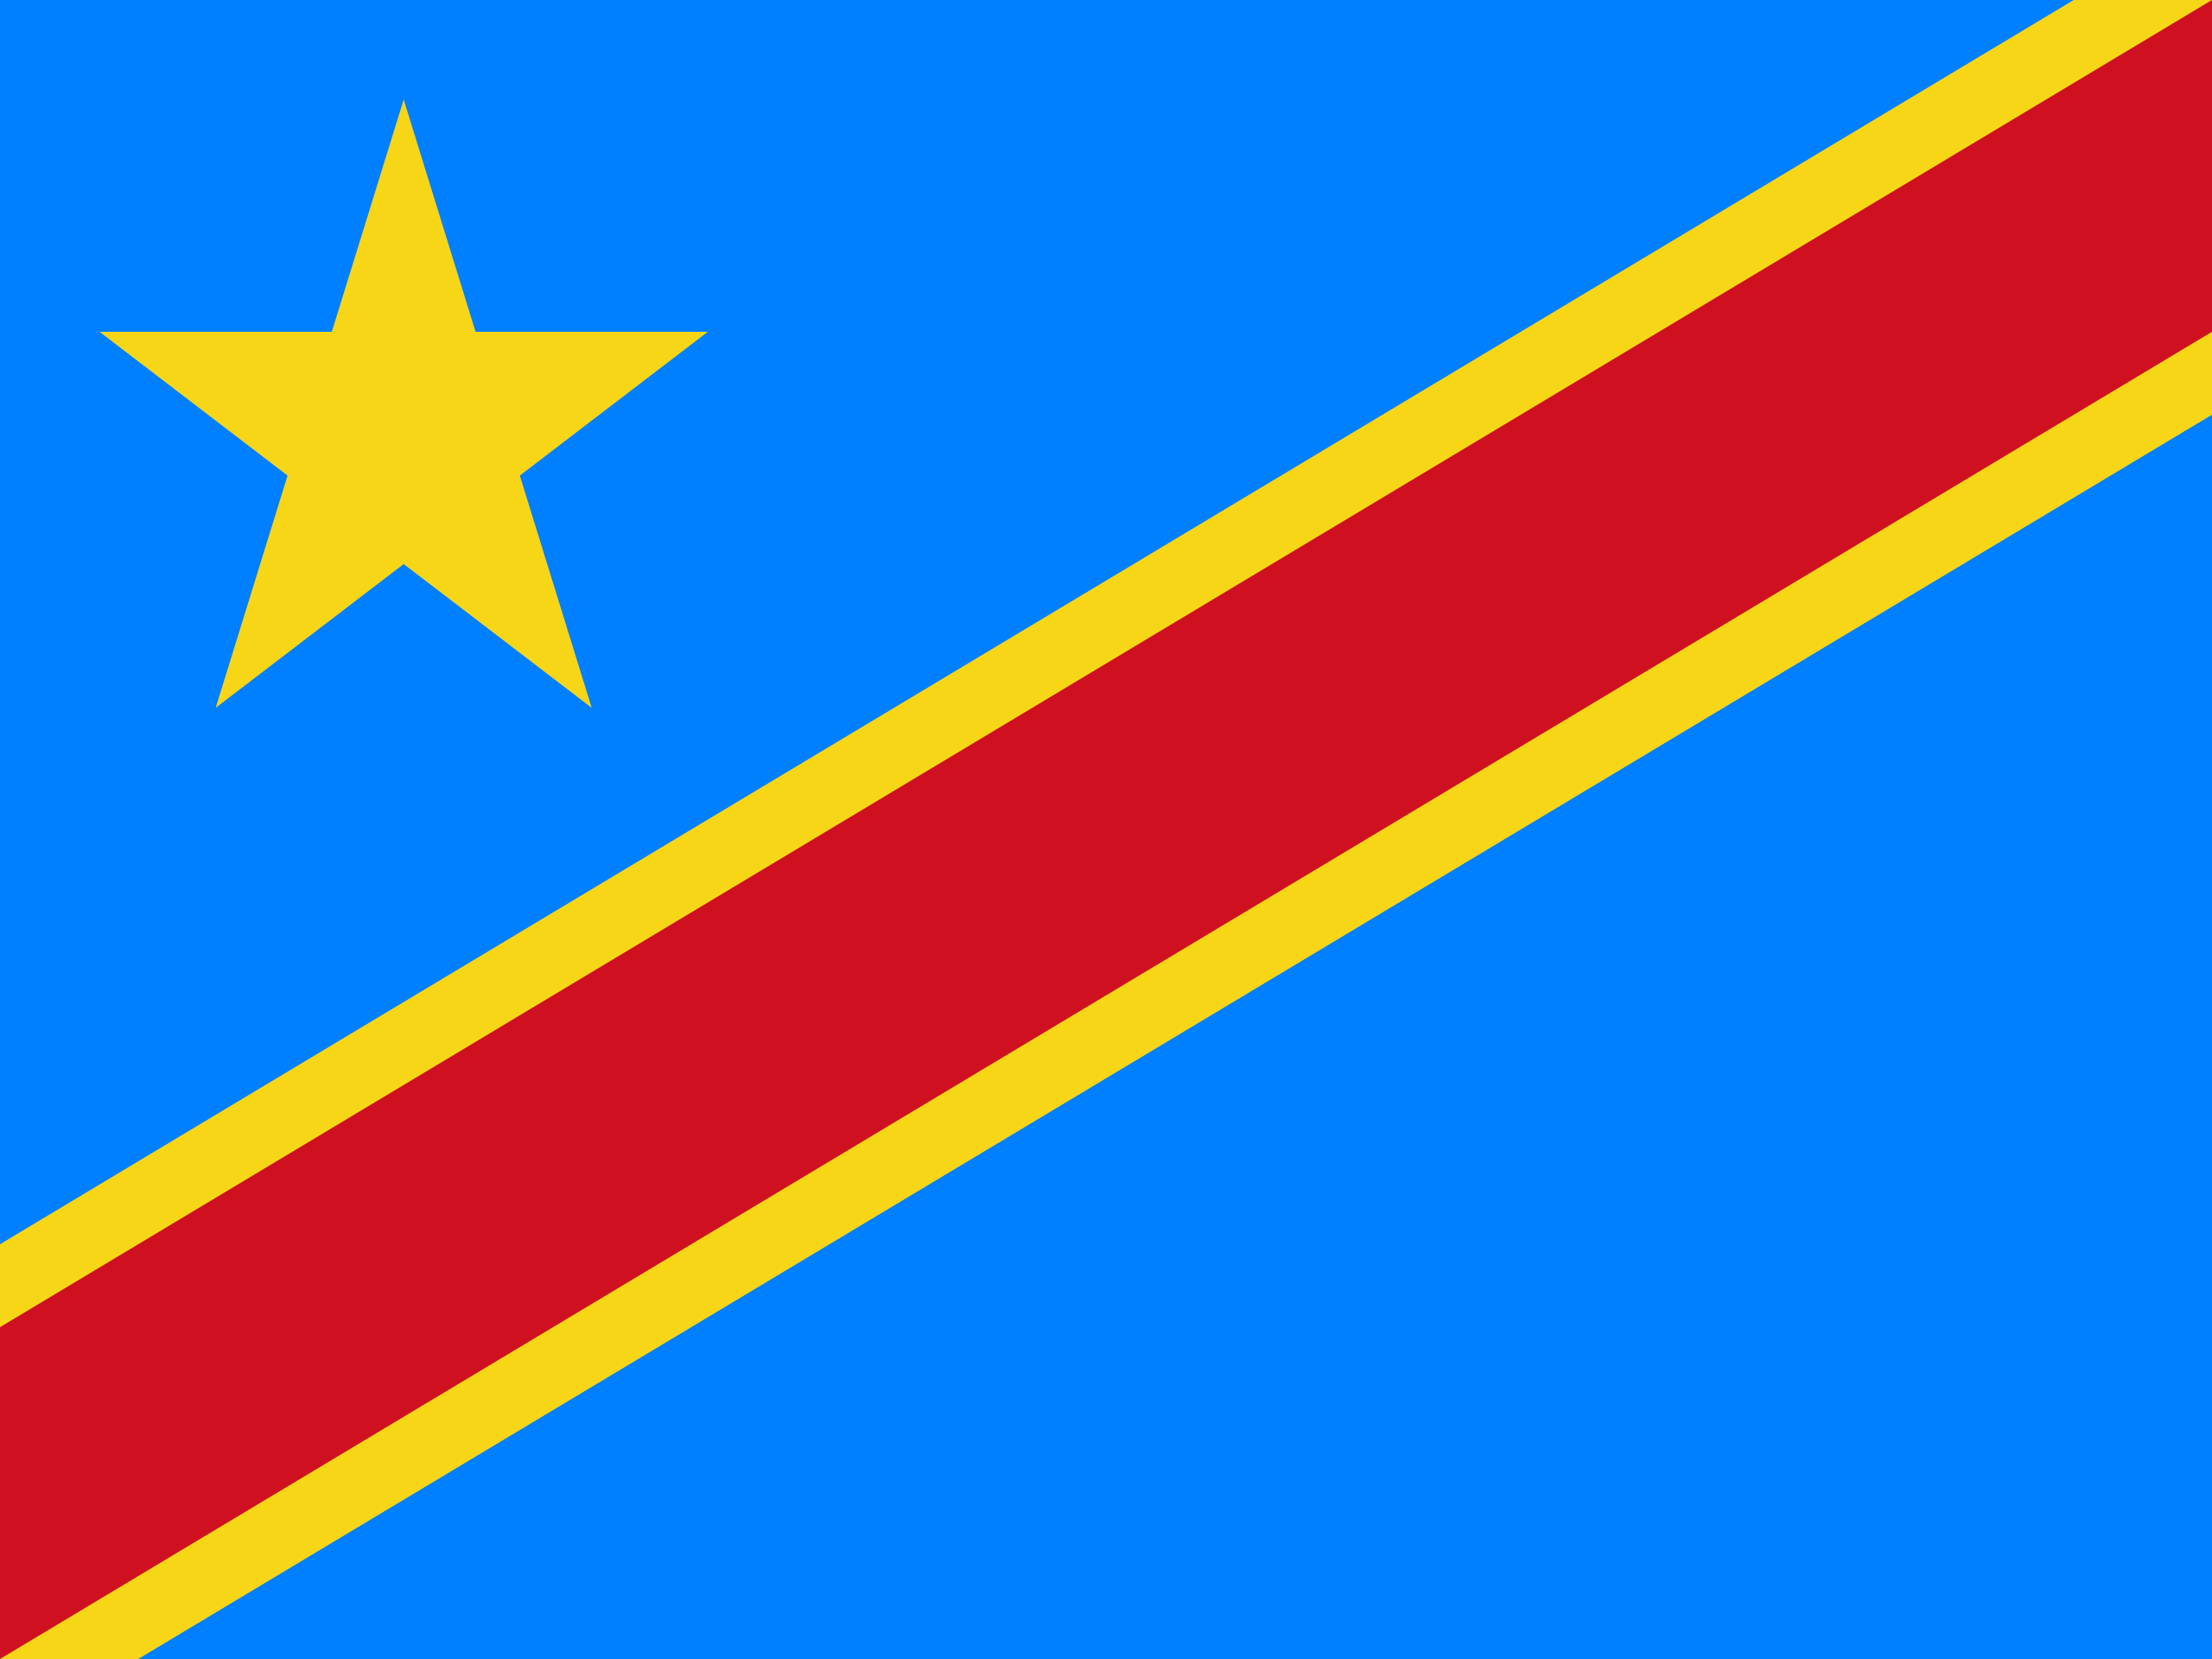 2560px-Flag_of_the_Democratic_Republic_of_the_Congo.svg Democratic Republic of the Congo